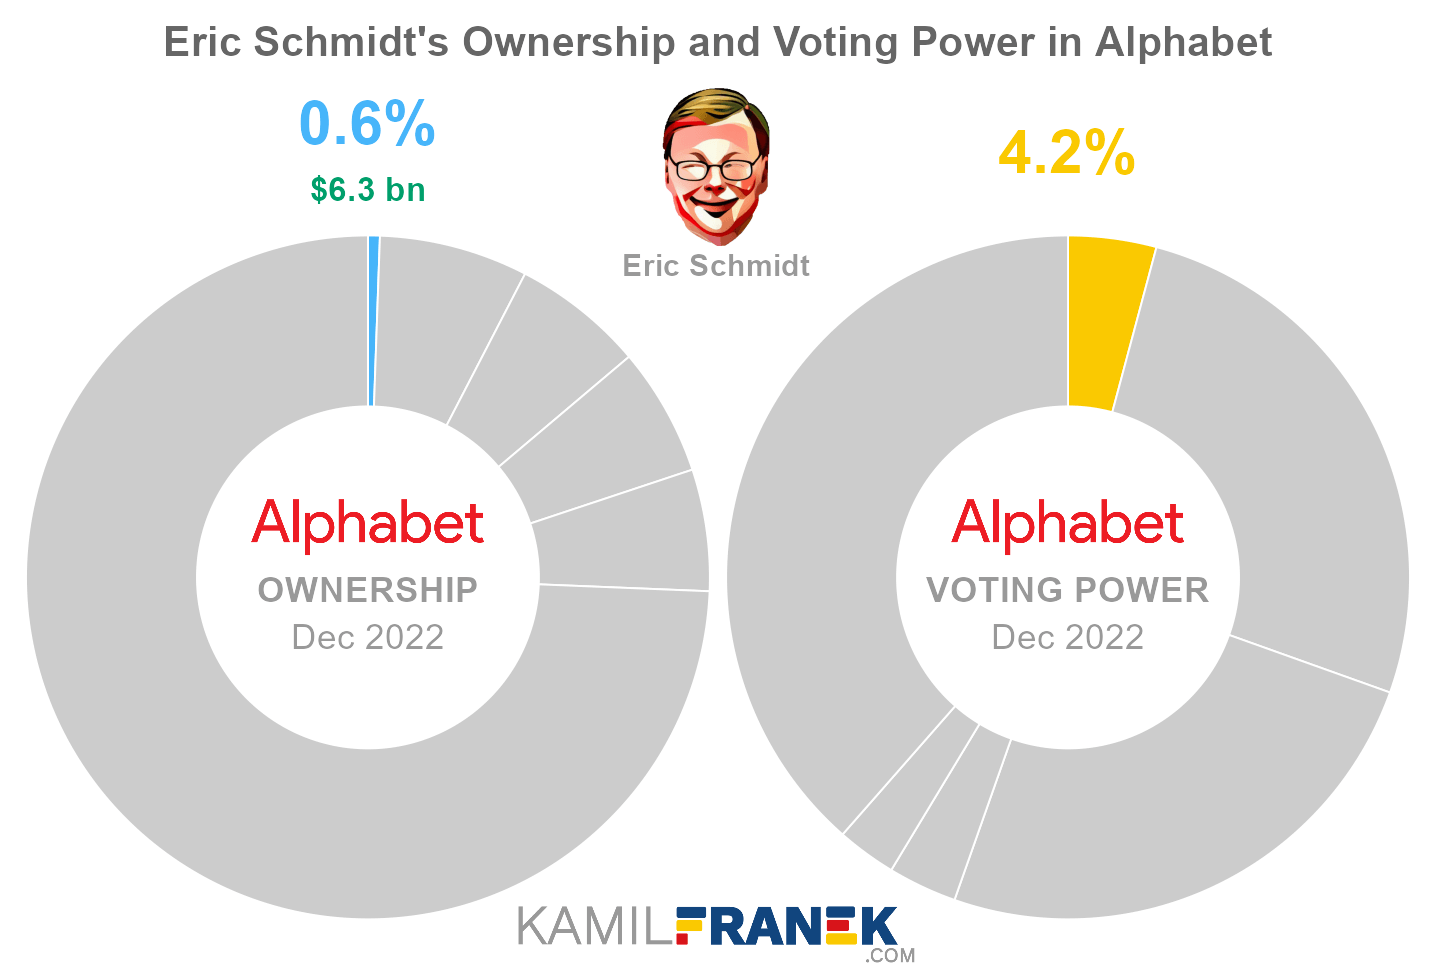 Eric Schmidt's share ownership and voting power in Alphabet (chart)